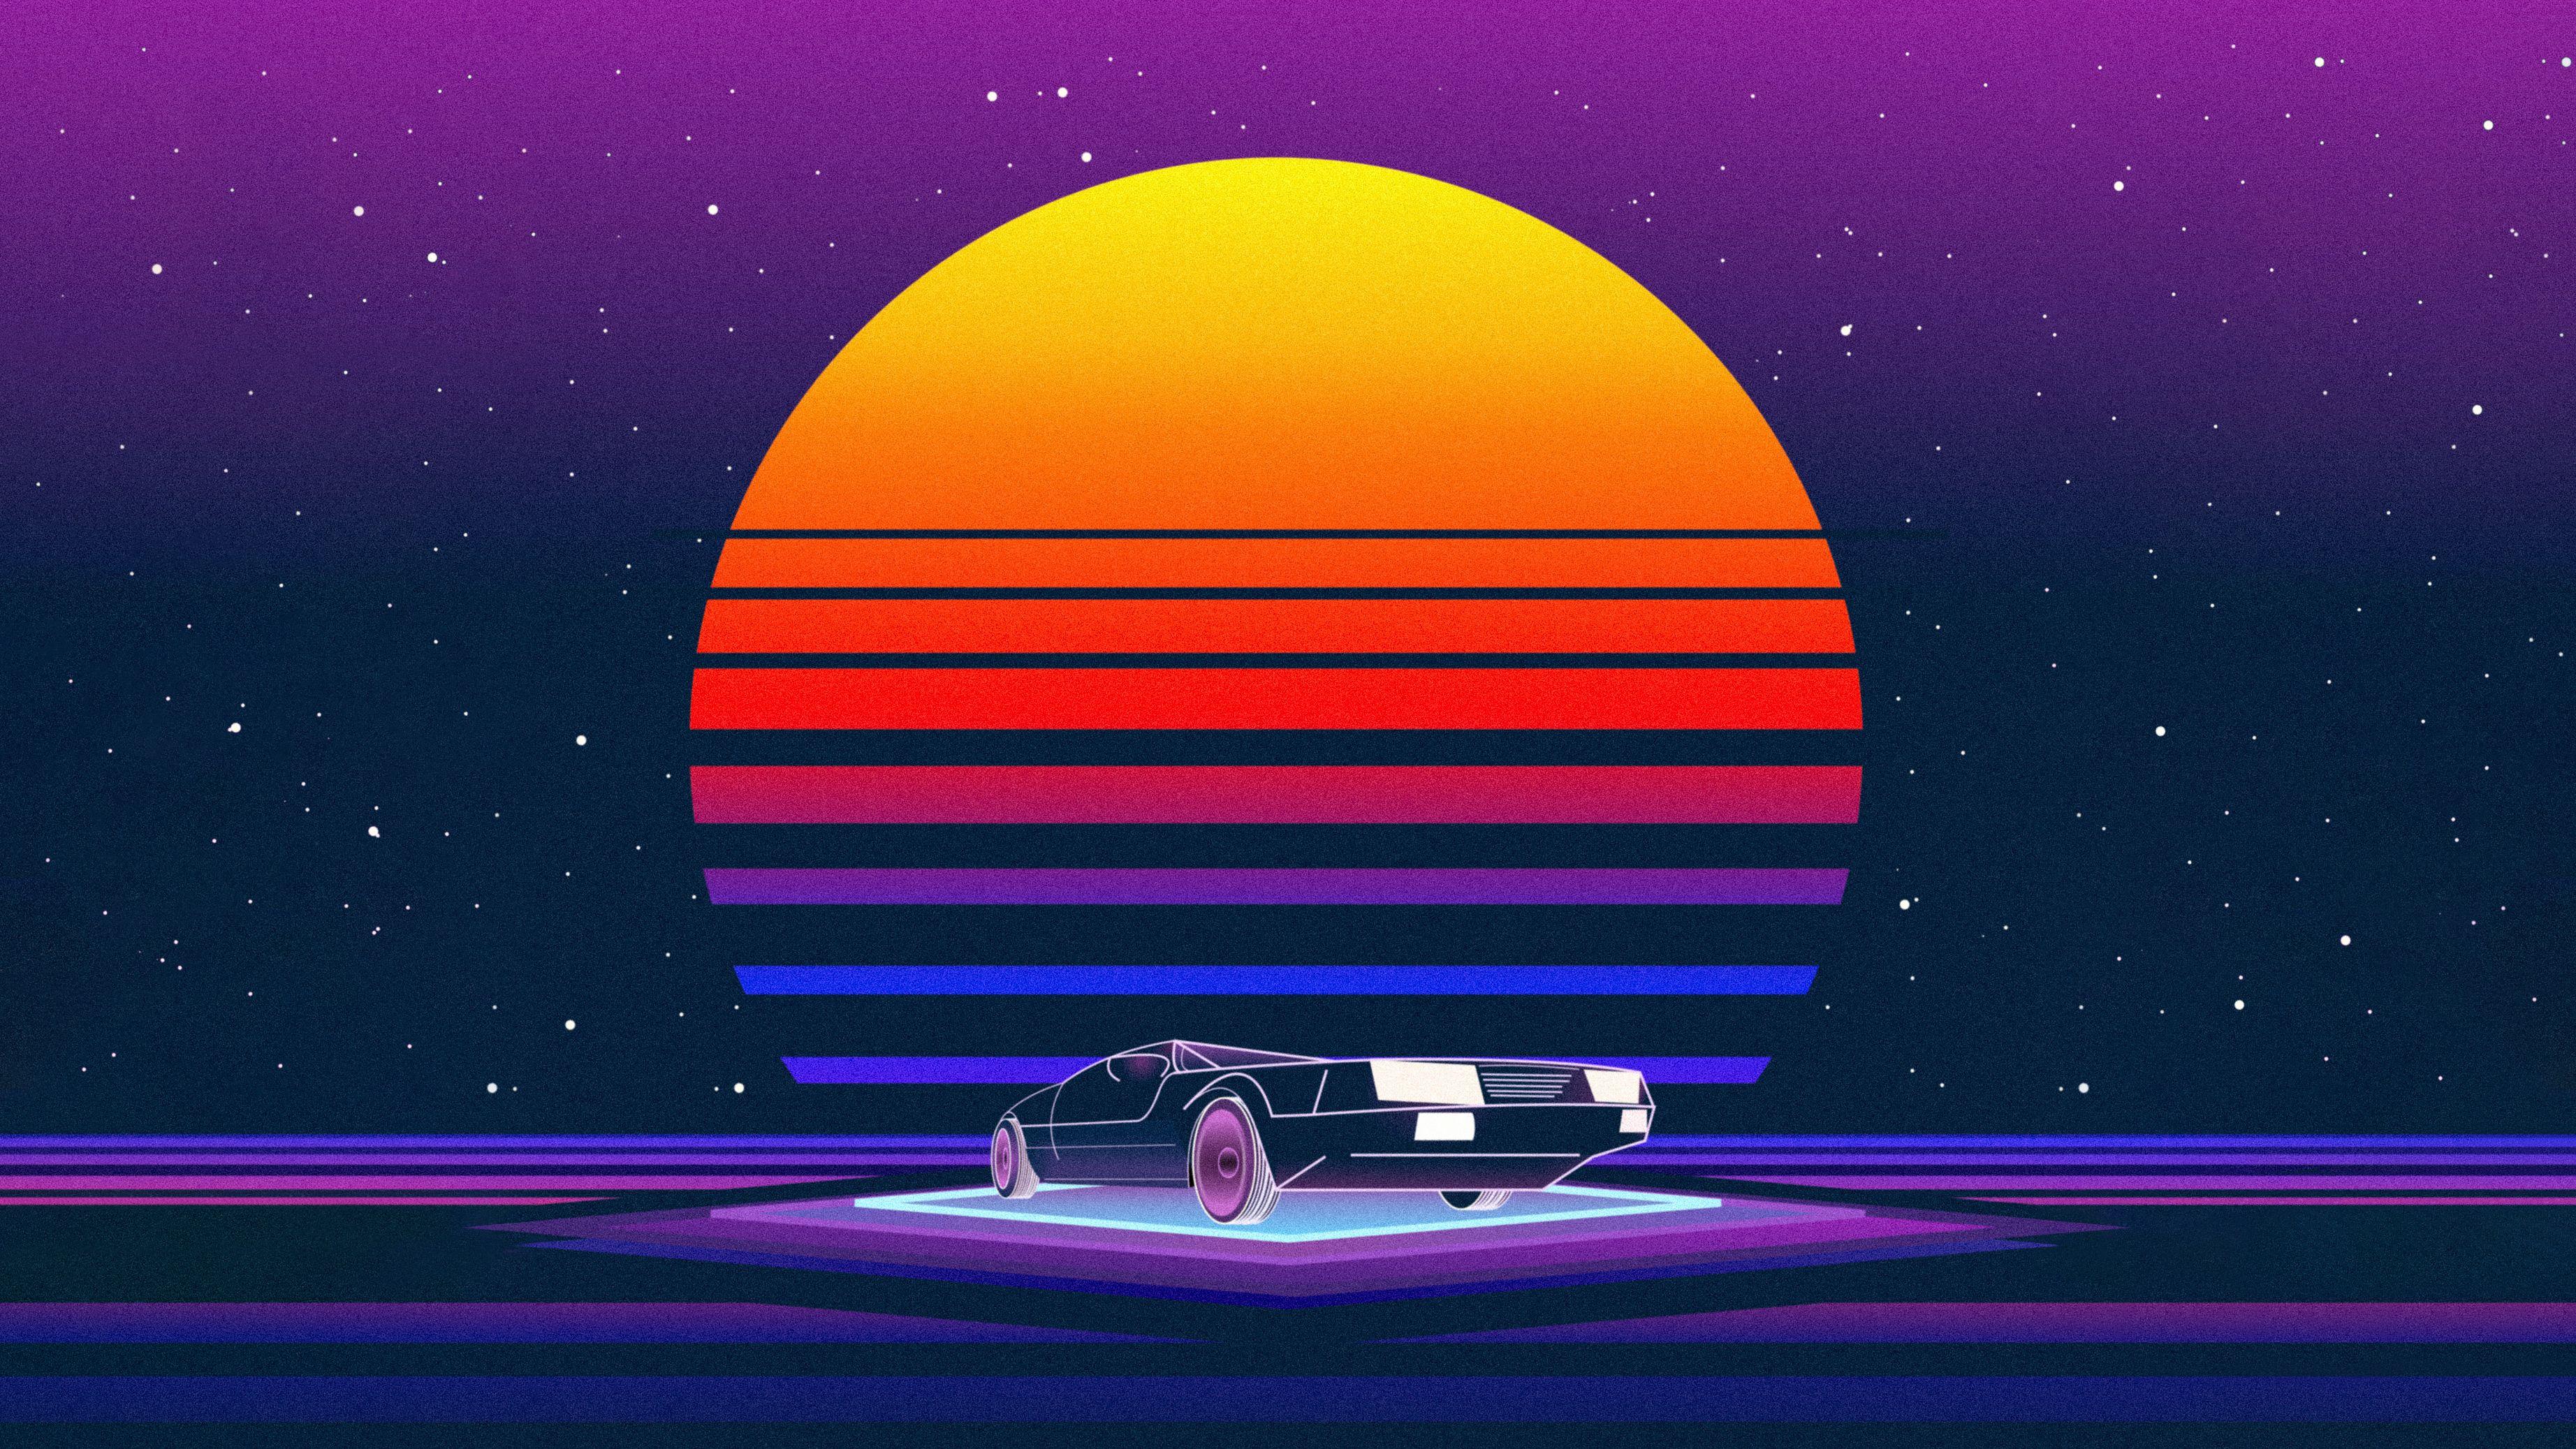 90s Retro Wave Wallpapers Top Free 90s Retro Wave Backgrounds Wallpaperaccess 